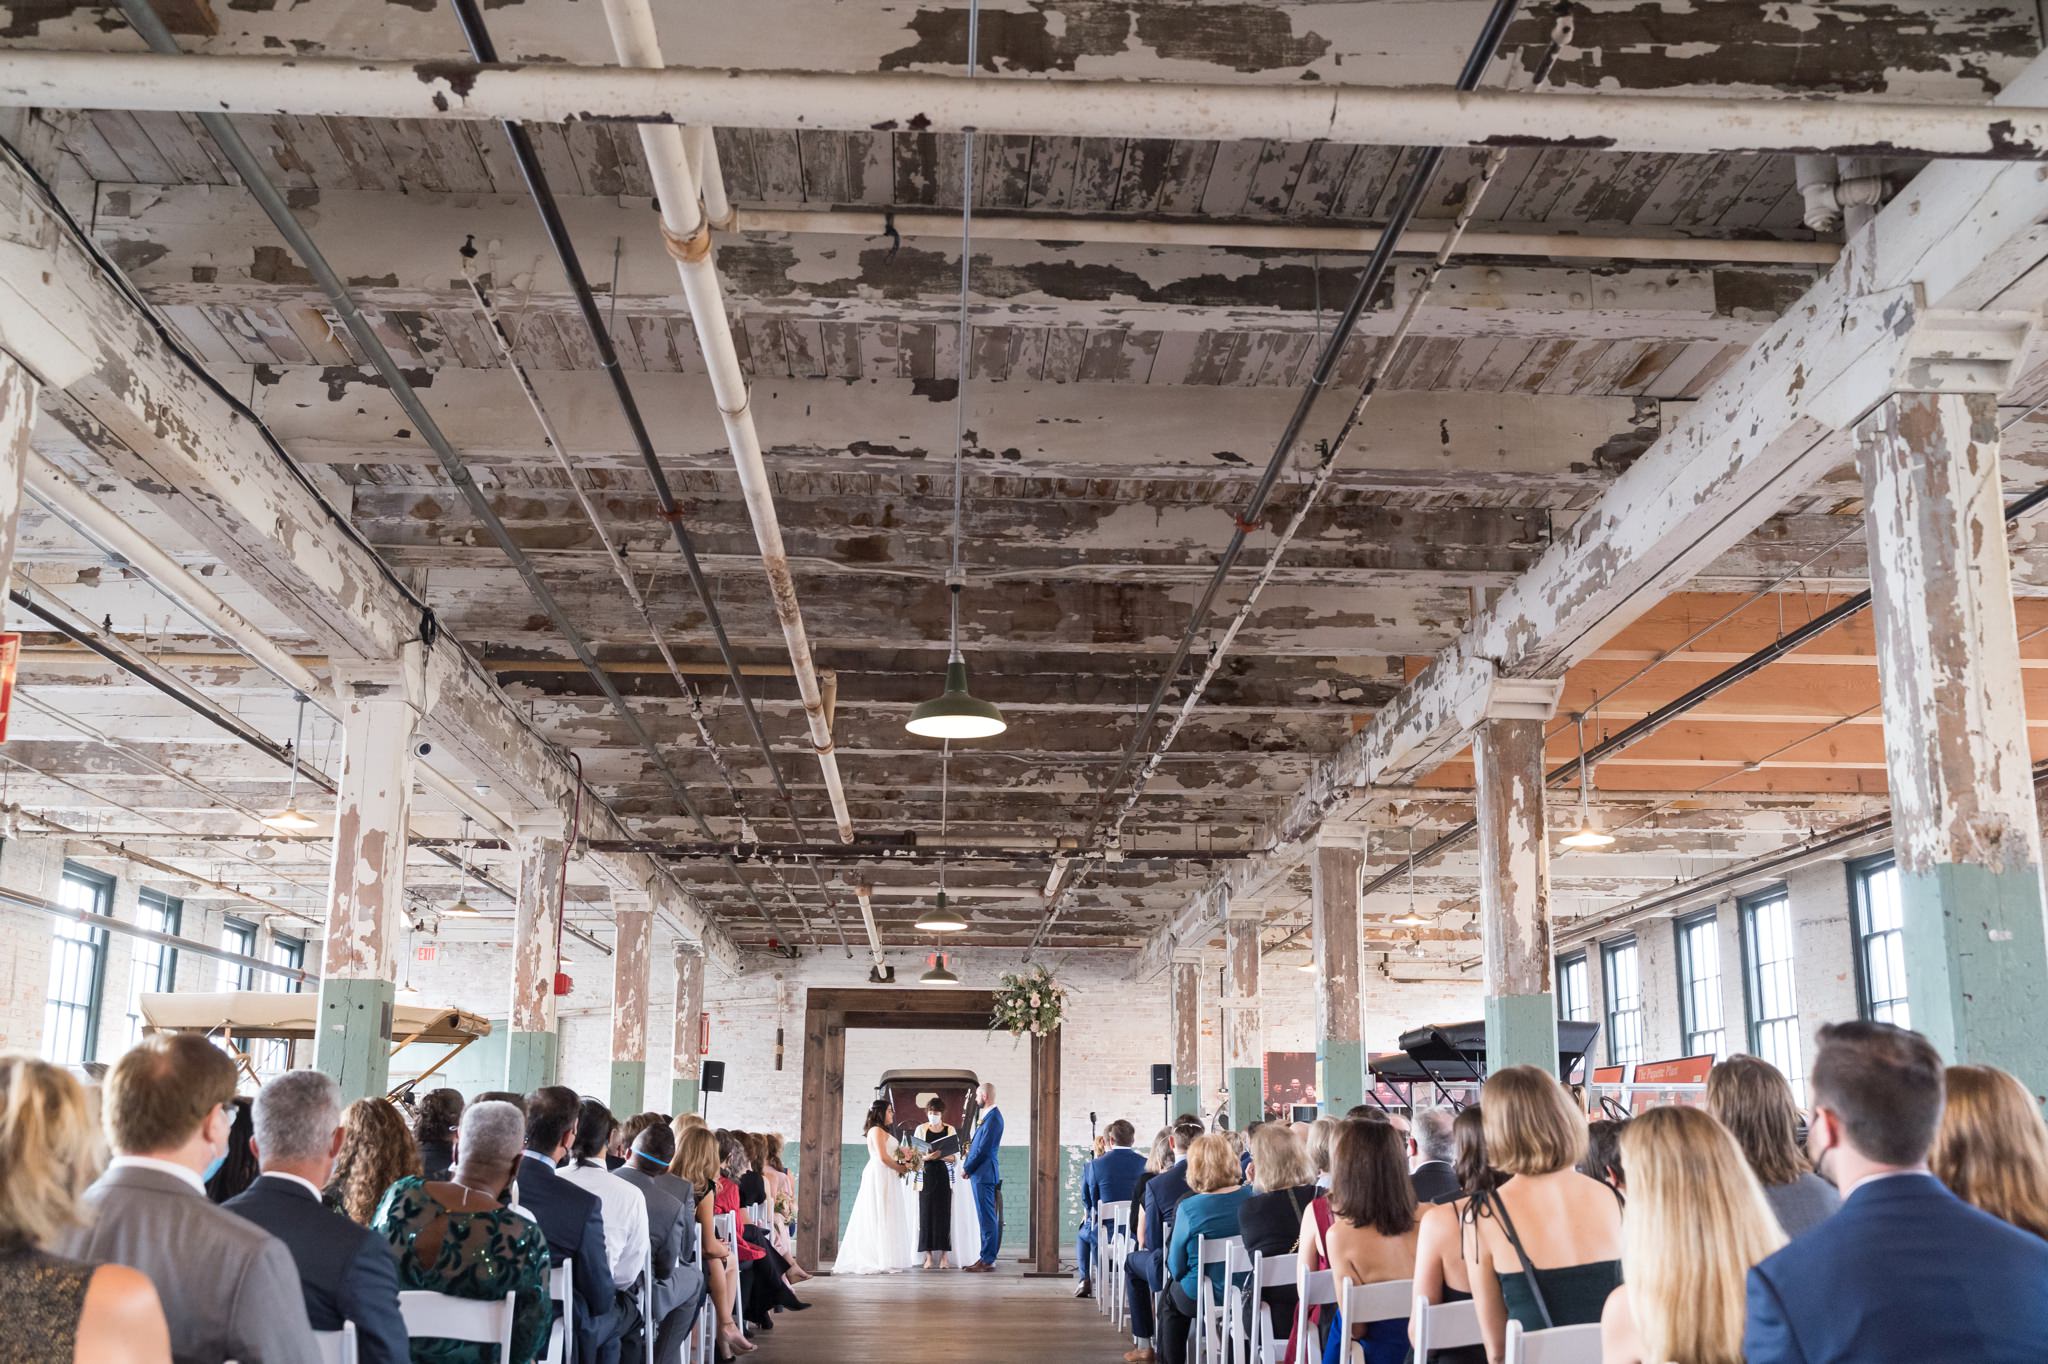 Ford Piquette Plant Wedding